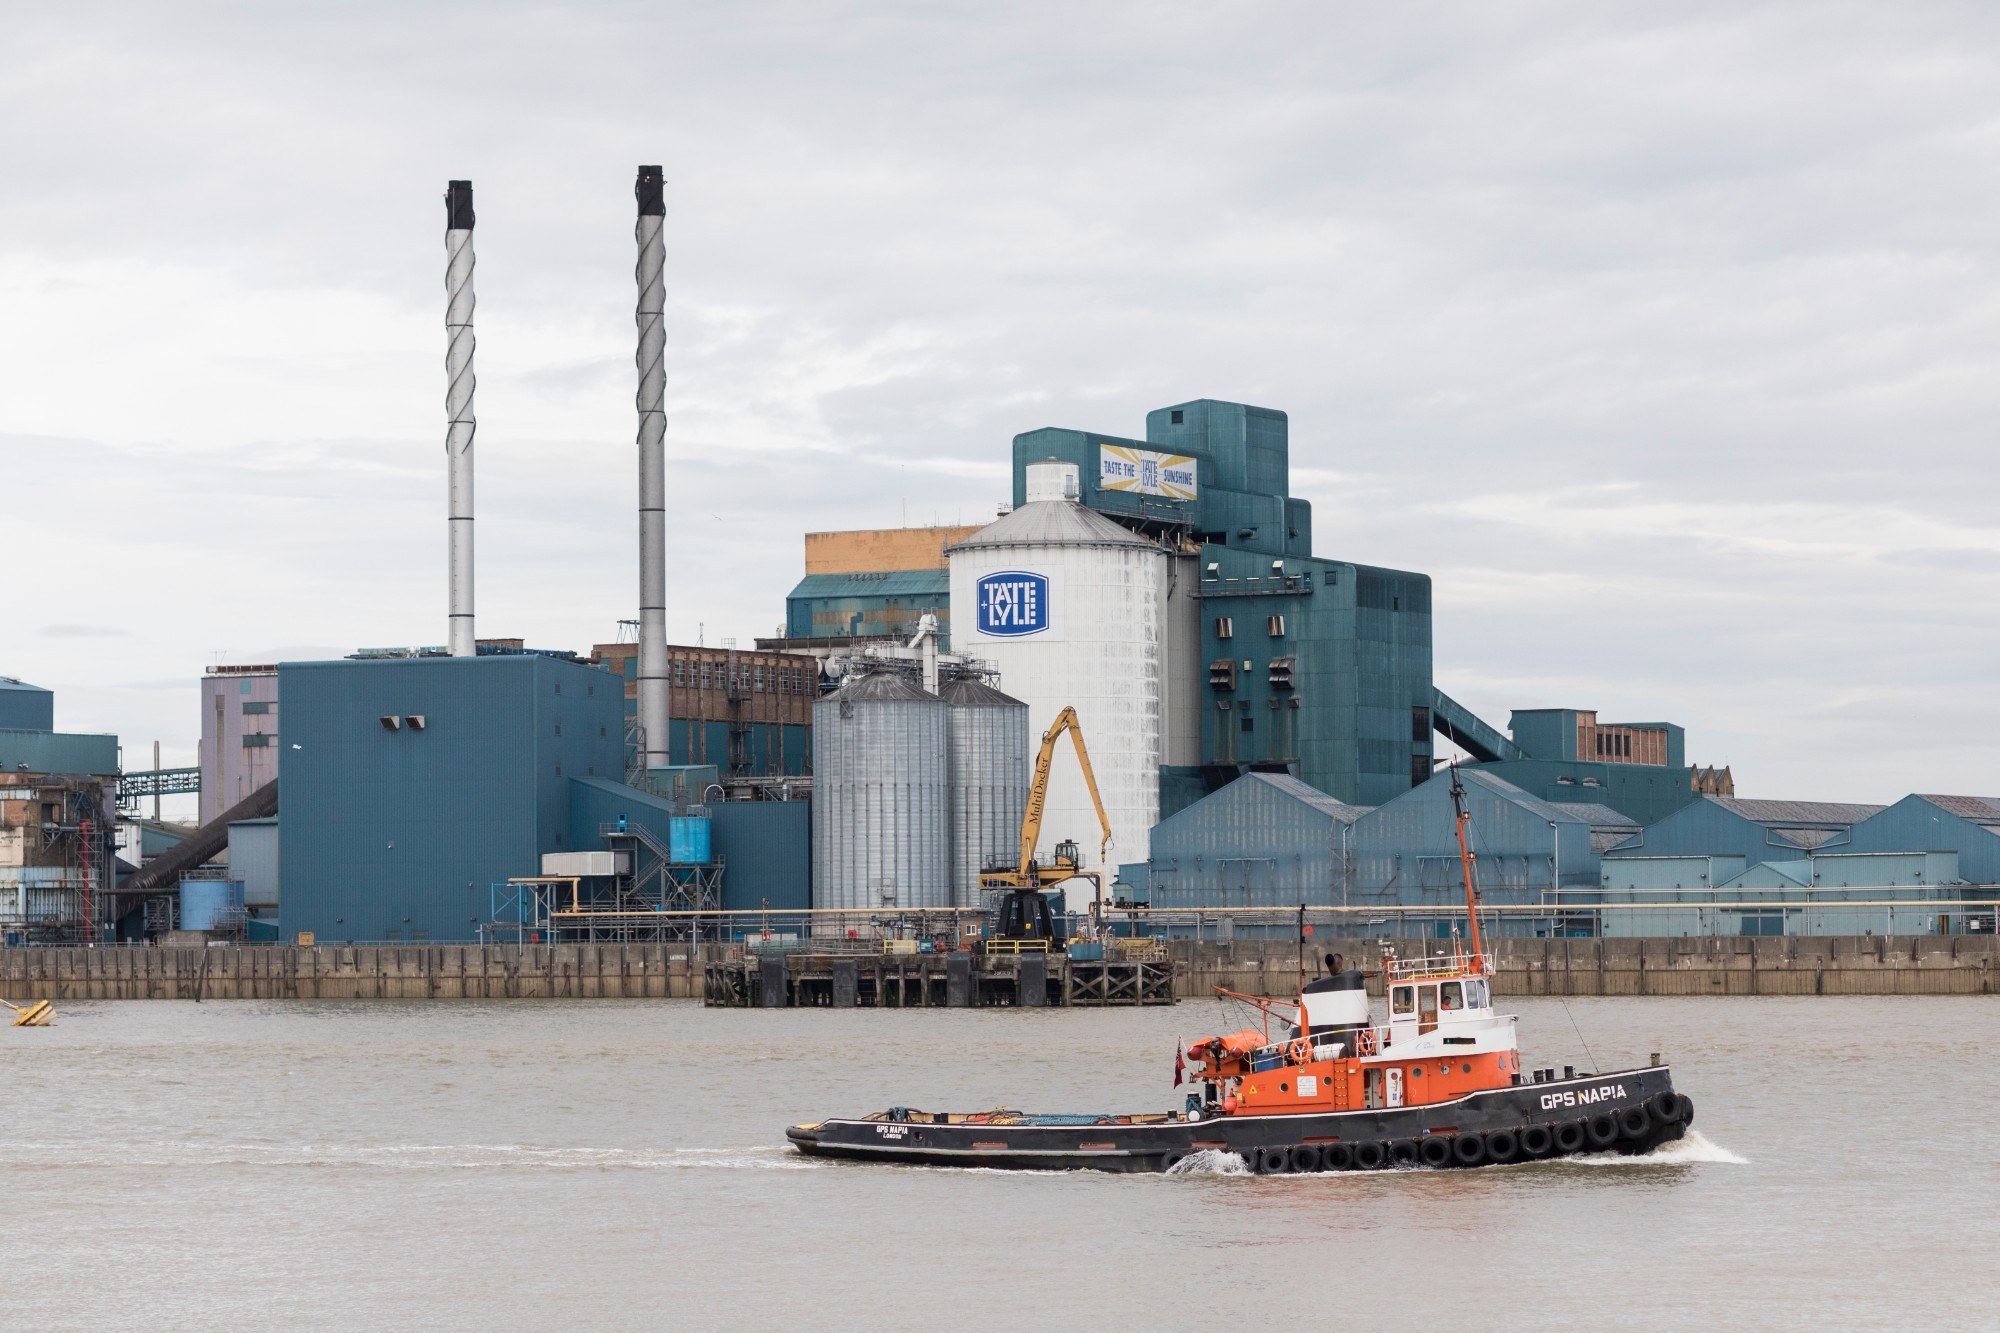 Tate & Lyle building exterior from the river with a boat in the foreground and big chimneys visible